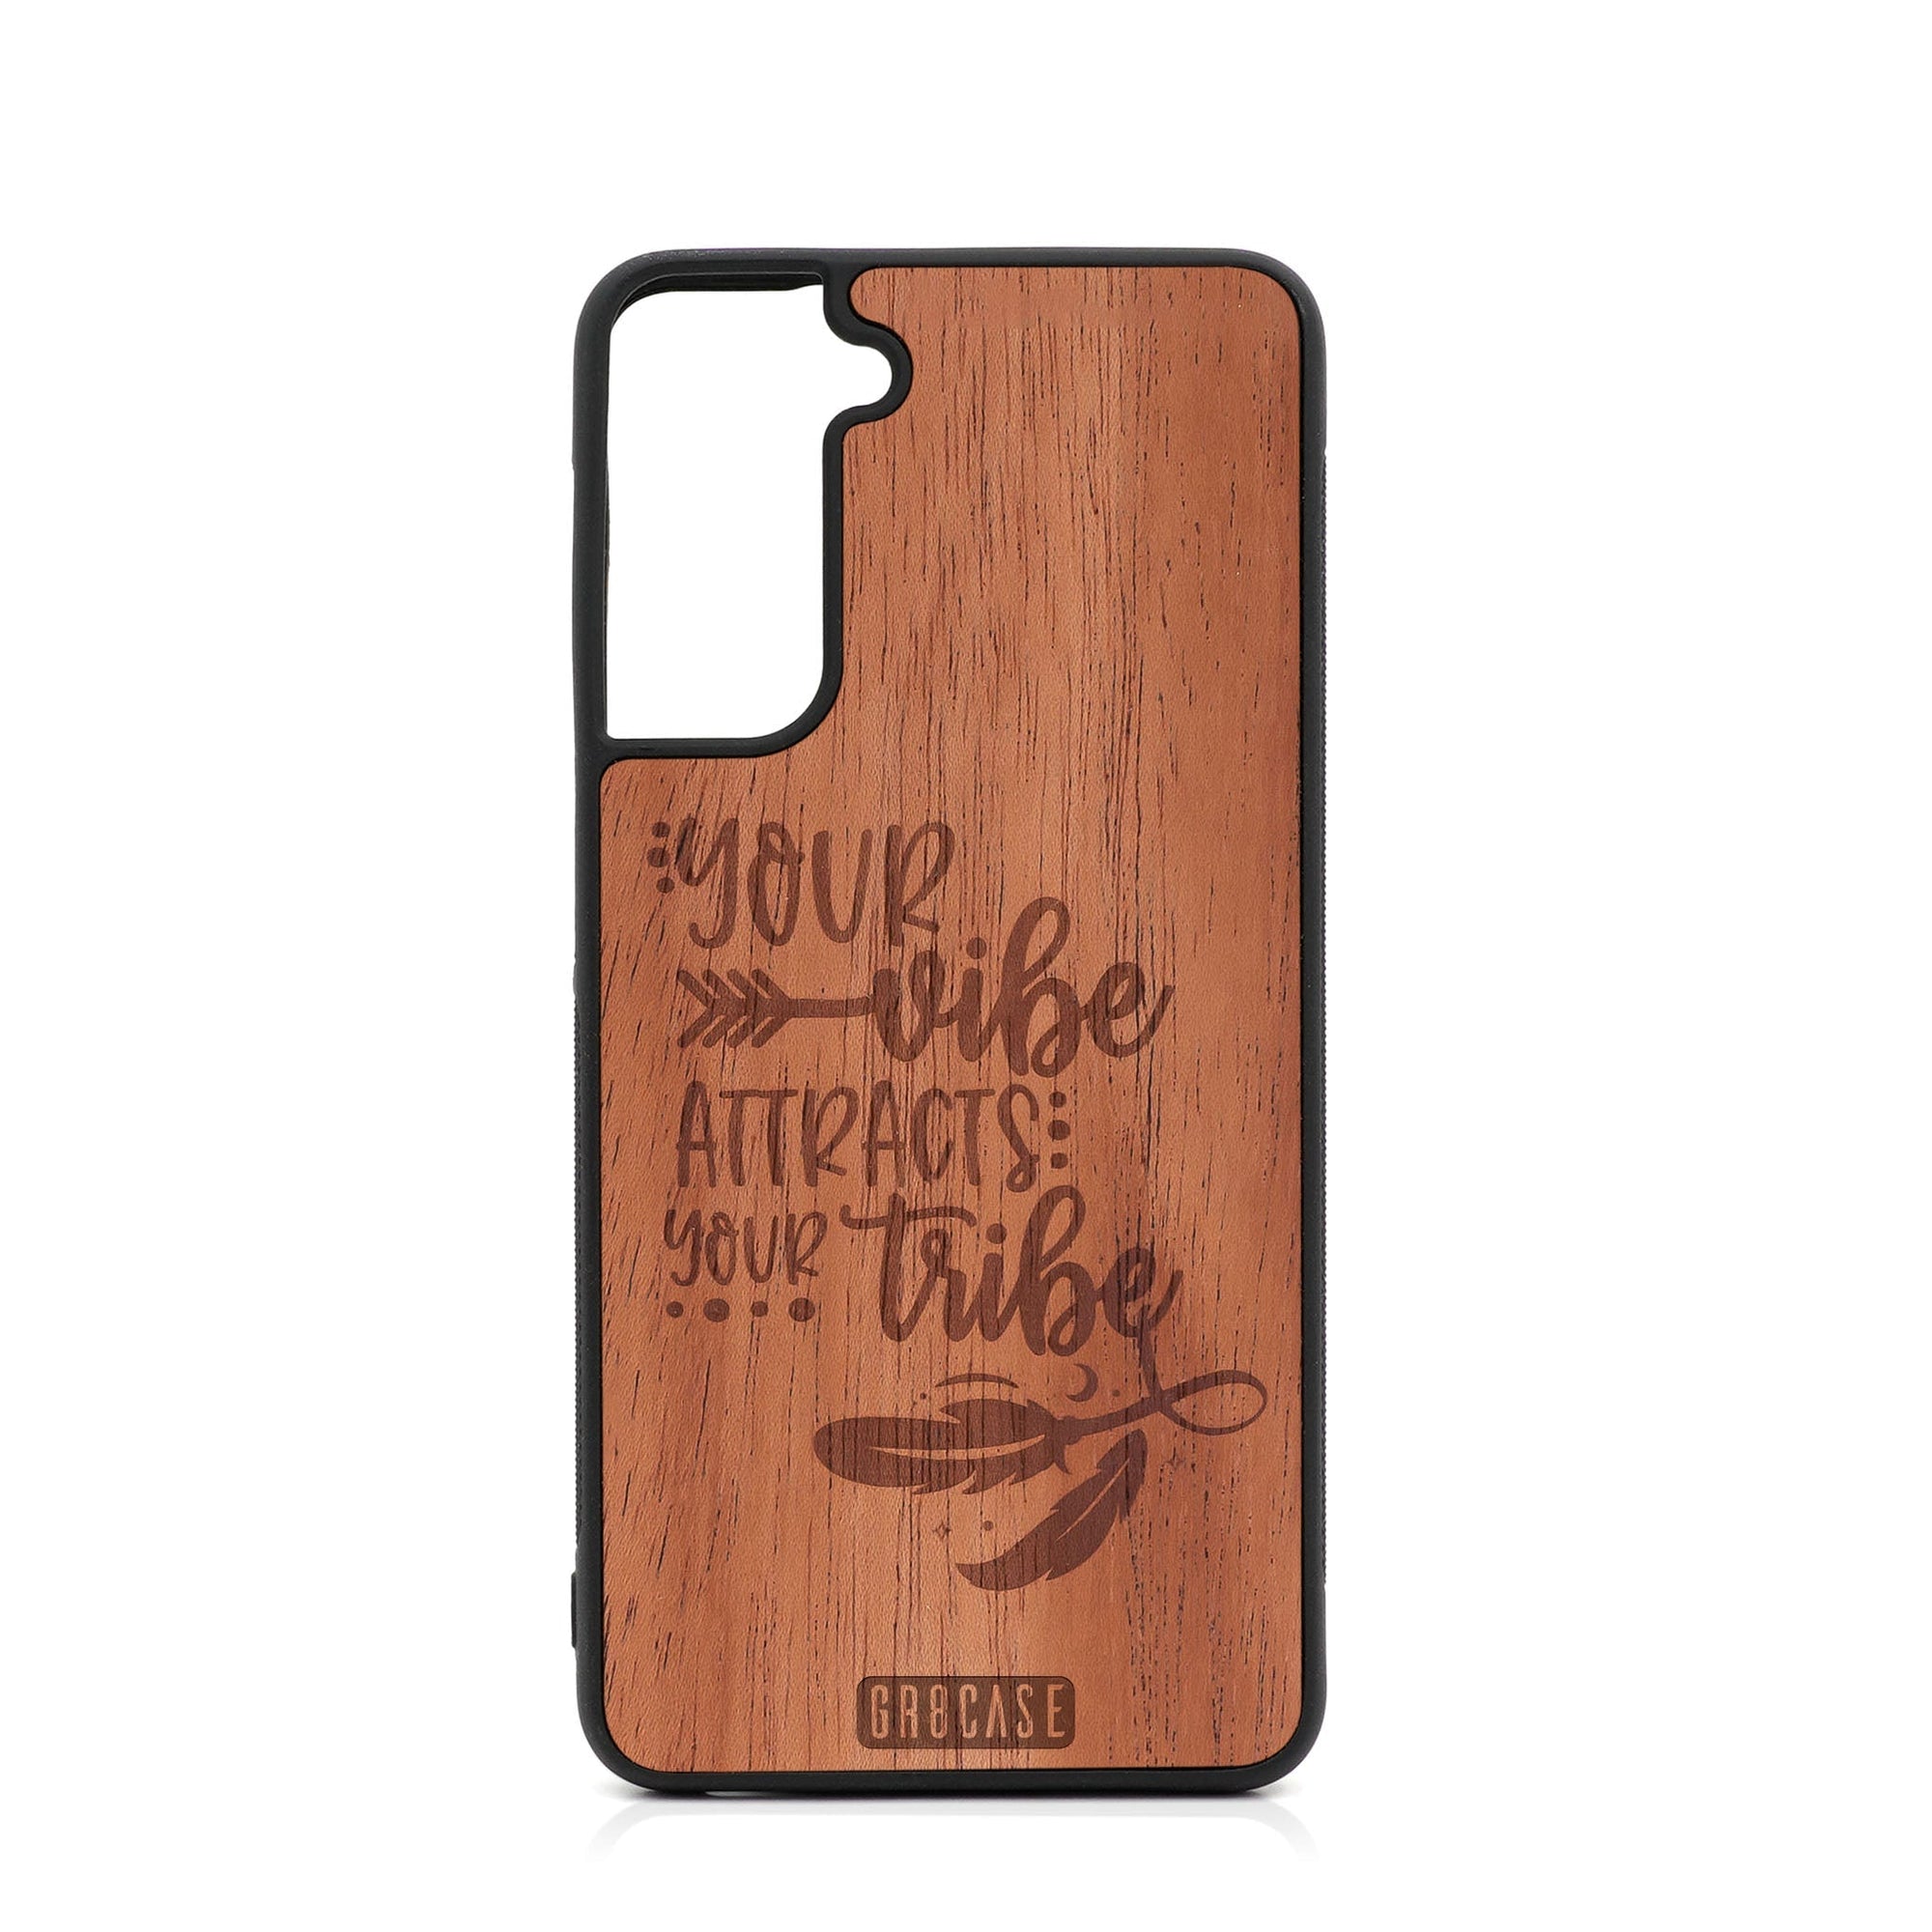 Your Vibe Attracts Your Tribe Design Wood Case For Samsung Galaxy S21 FE 5G